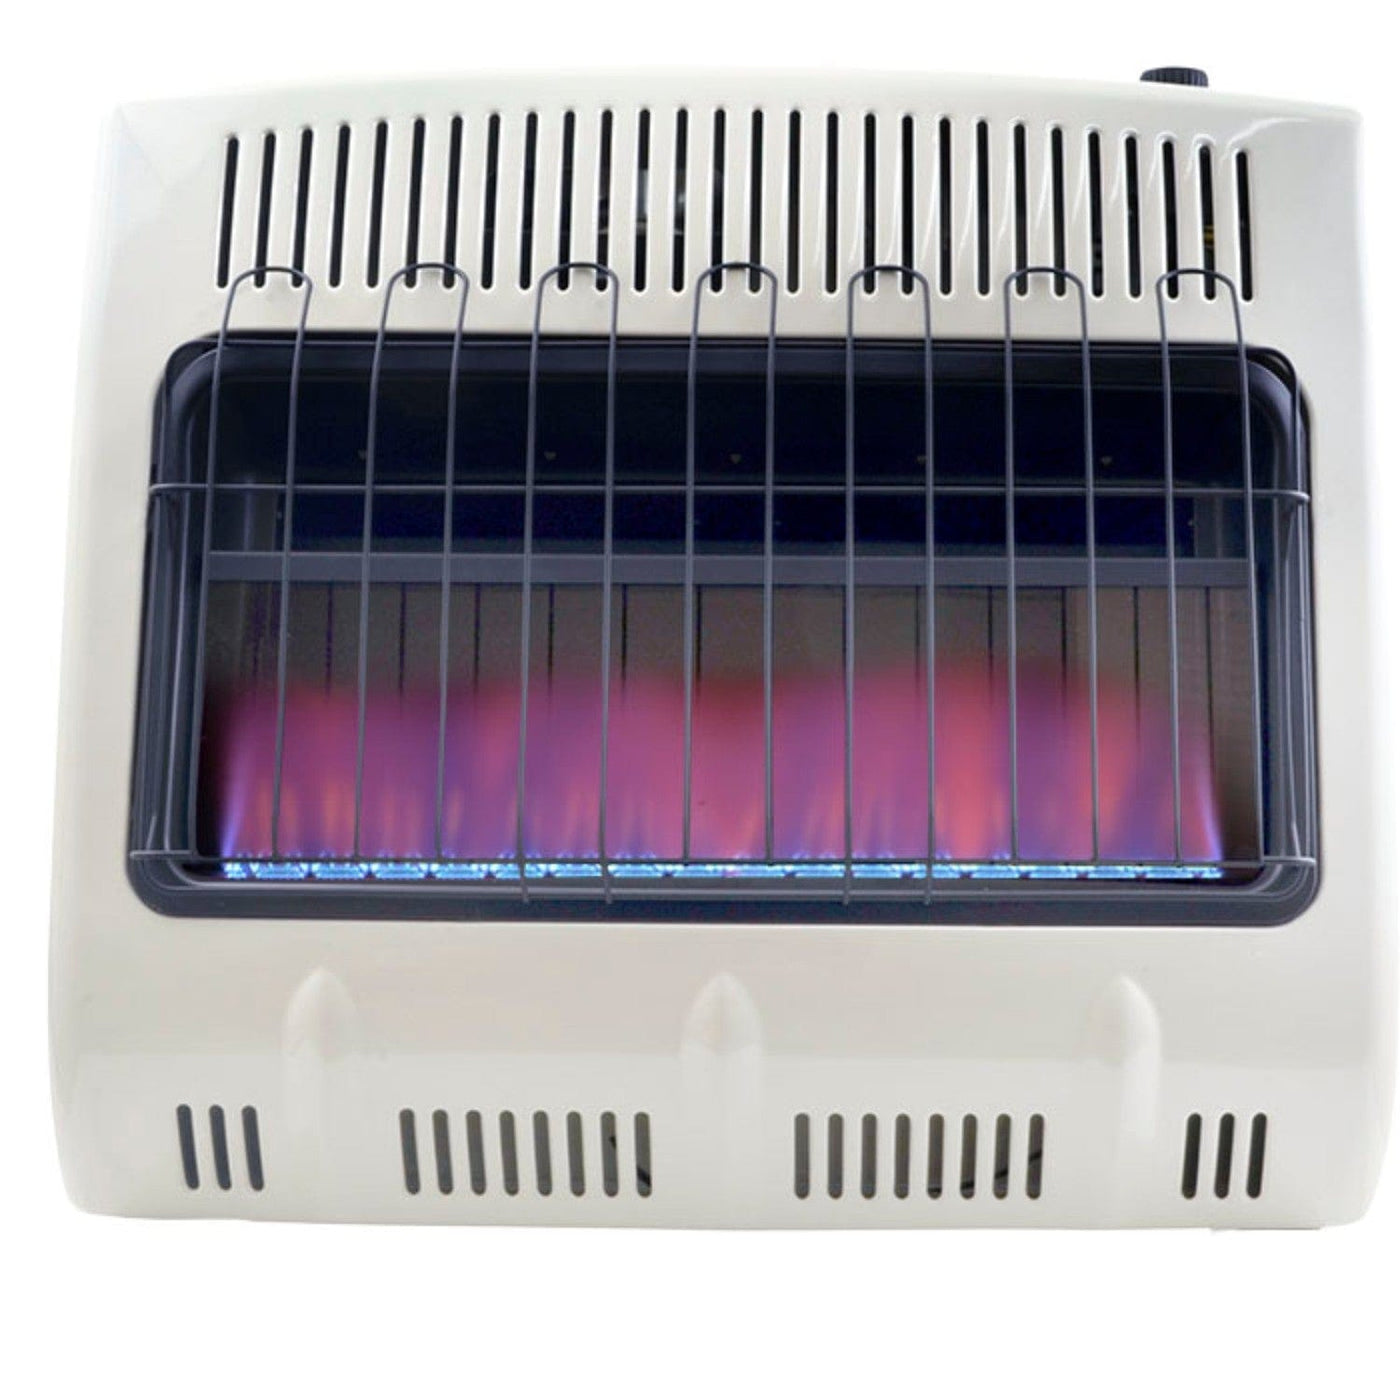 Mr. Heater Mr. Heater 30000 BTU Vent Free Blue Flame Propane Heater (F299730) Camping And Outdoor